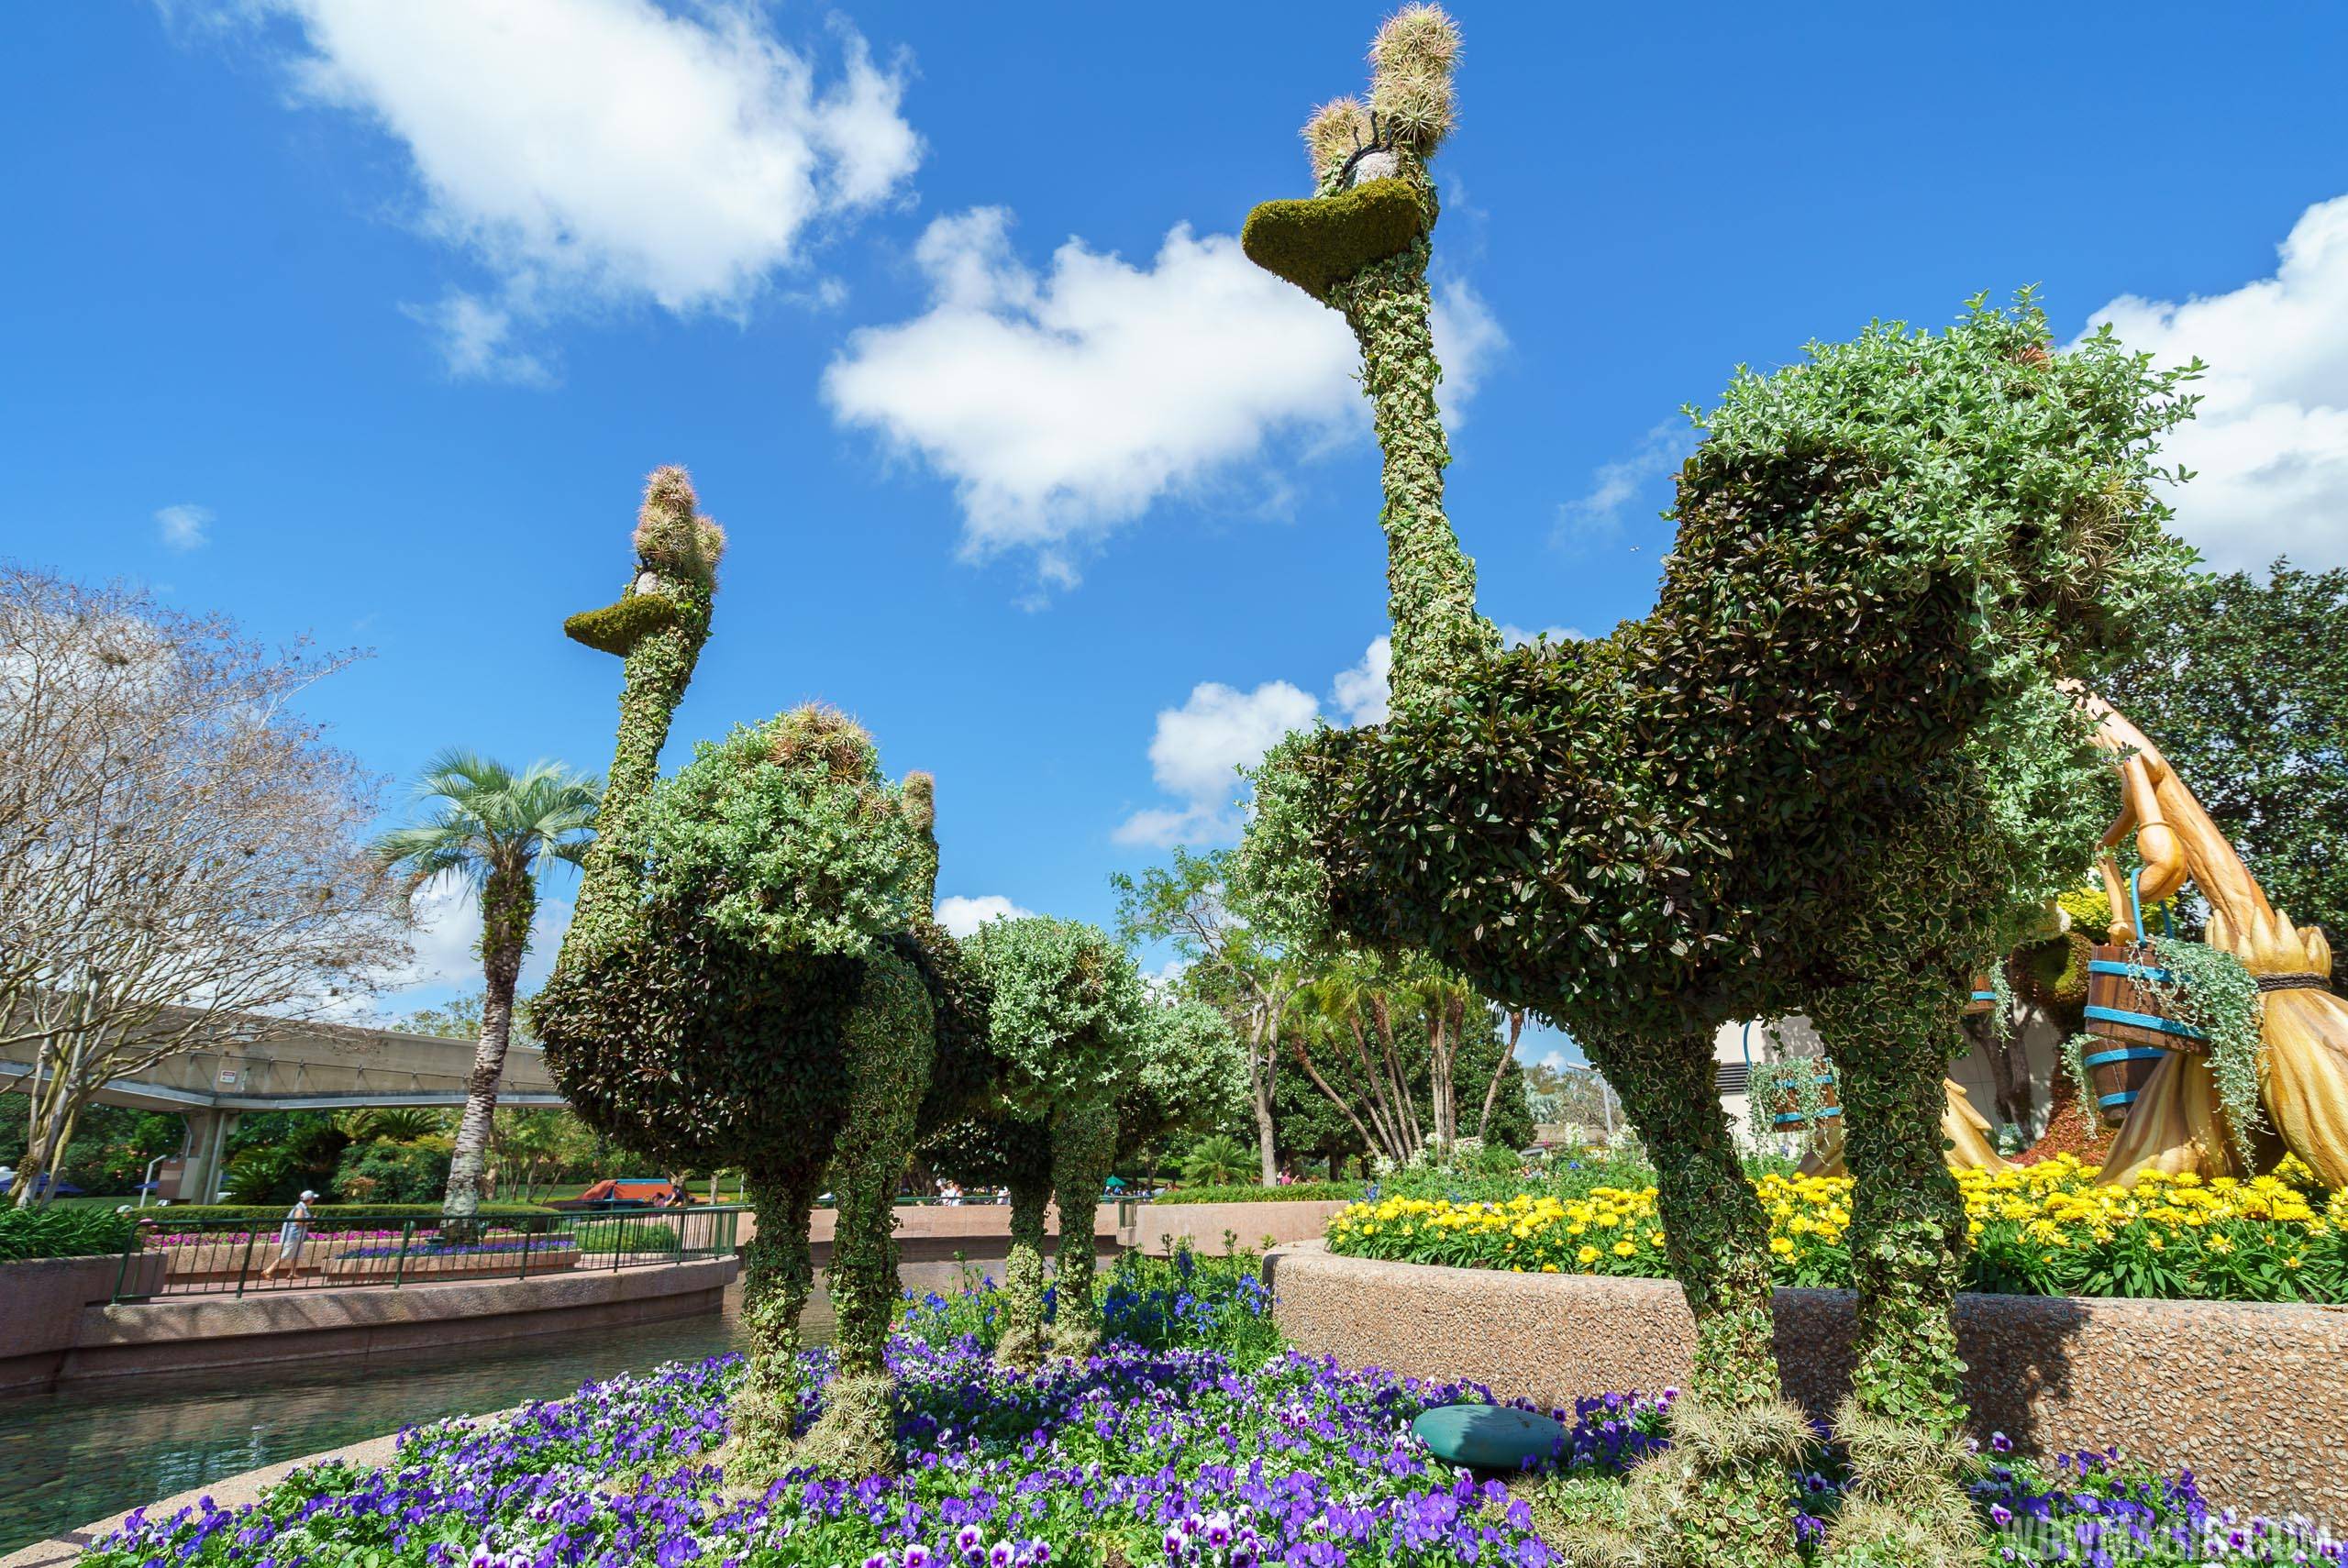 2017 Flower and Garden Festival - Fantasia topiaries in Future World West